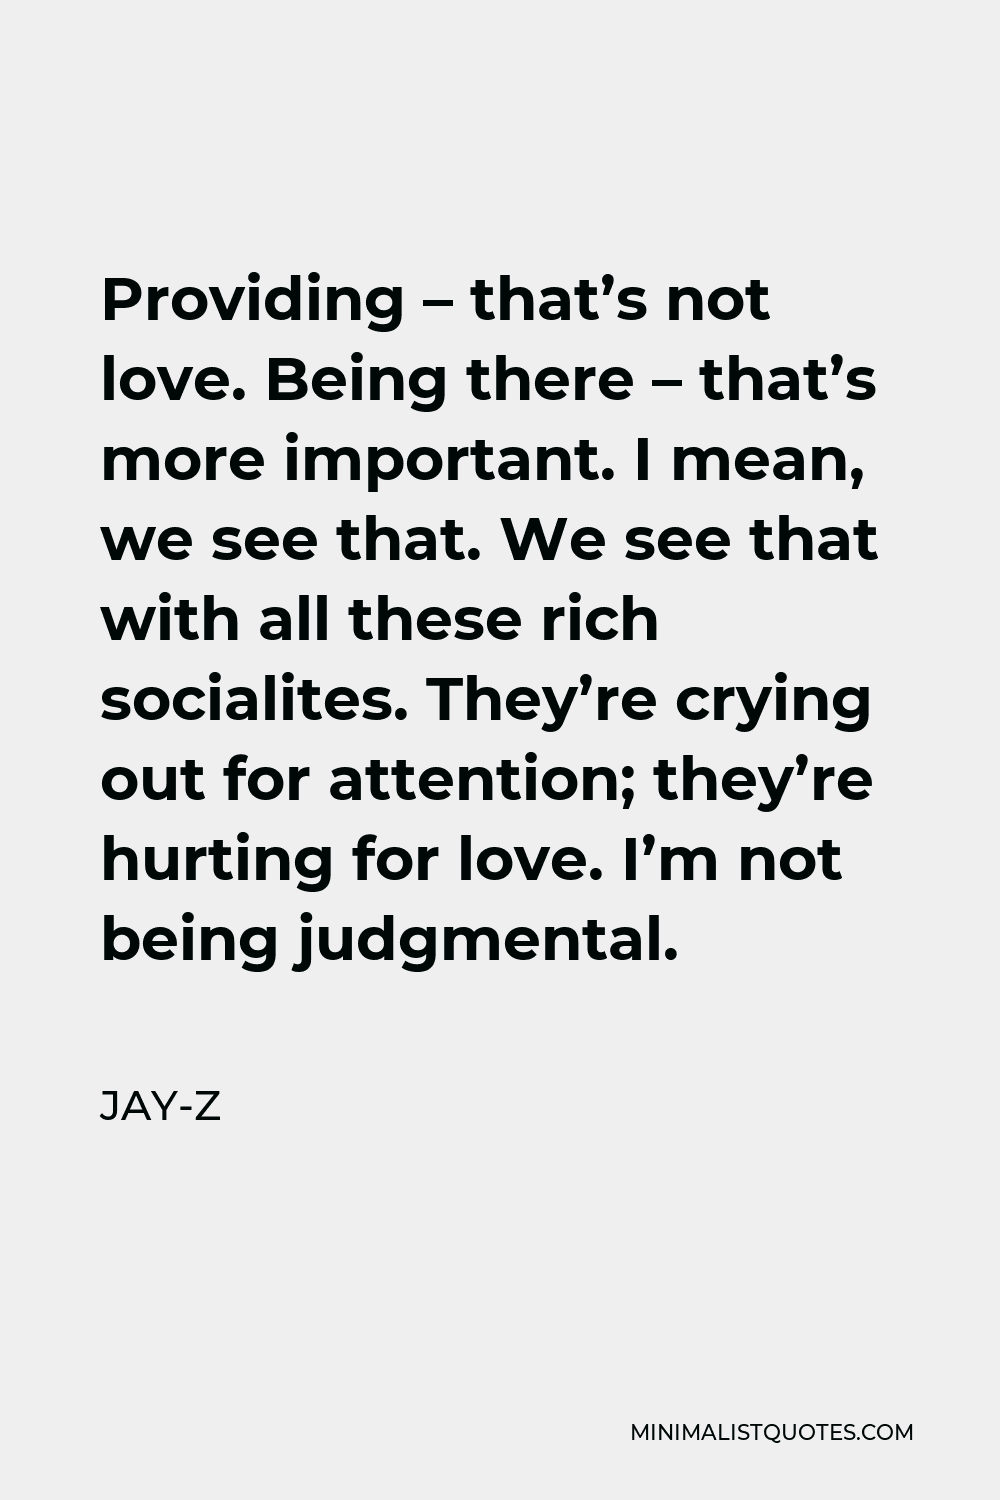 Jay-Z Quote - Providing – that’s not love. Being there – that’s more important. I mean, we see that. We see that with all these rich socialites. They’re crying out for attention; they’re hurting for love. I’m not being judgmental.